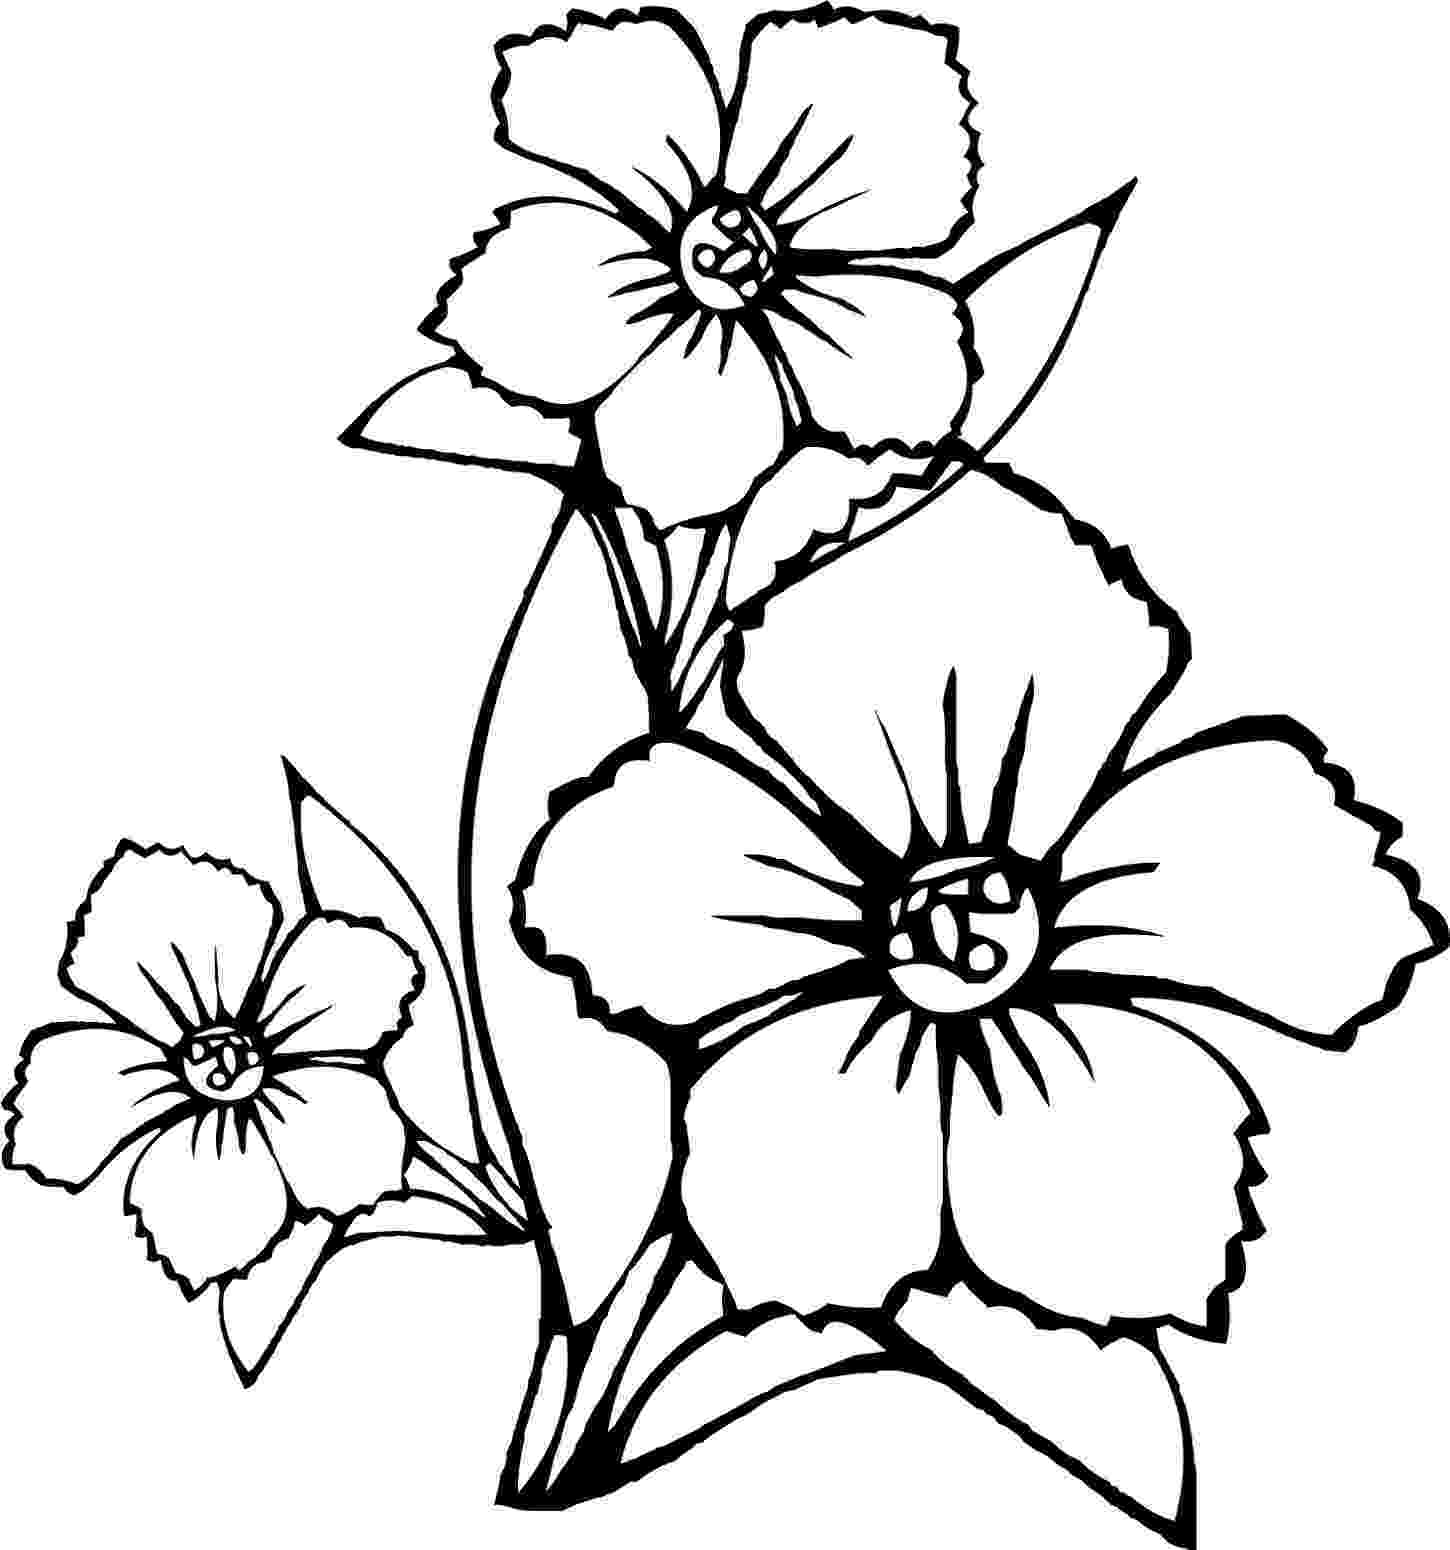 pretty flowers coloring pages beautiful flowers detailed floral designs coloring book flowers coloring pretty pages 